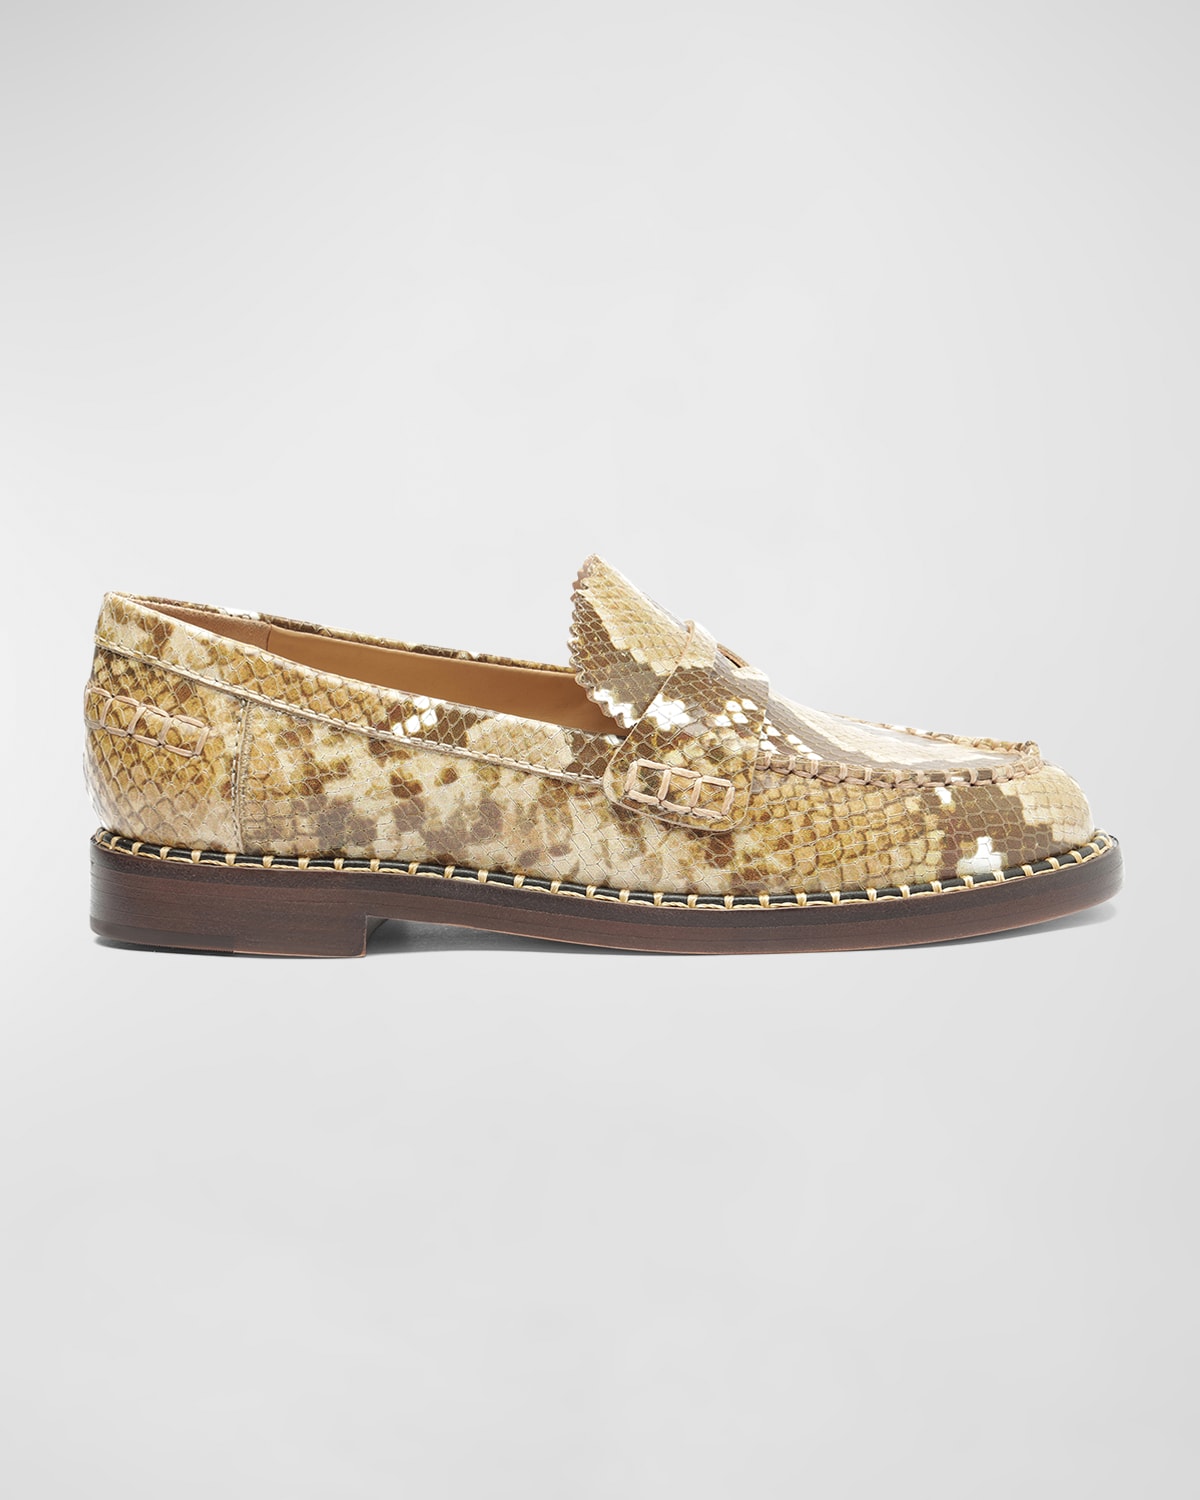 SCHUTZ CHRISTIE EMBOSSED PENNY LOAFERS